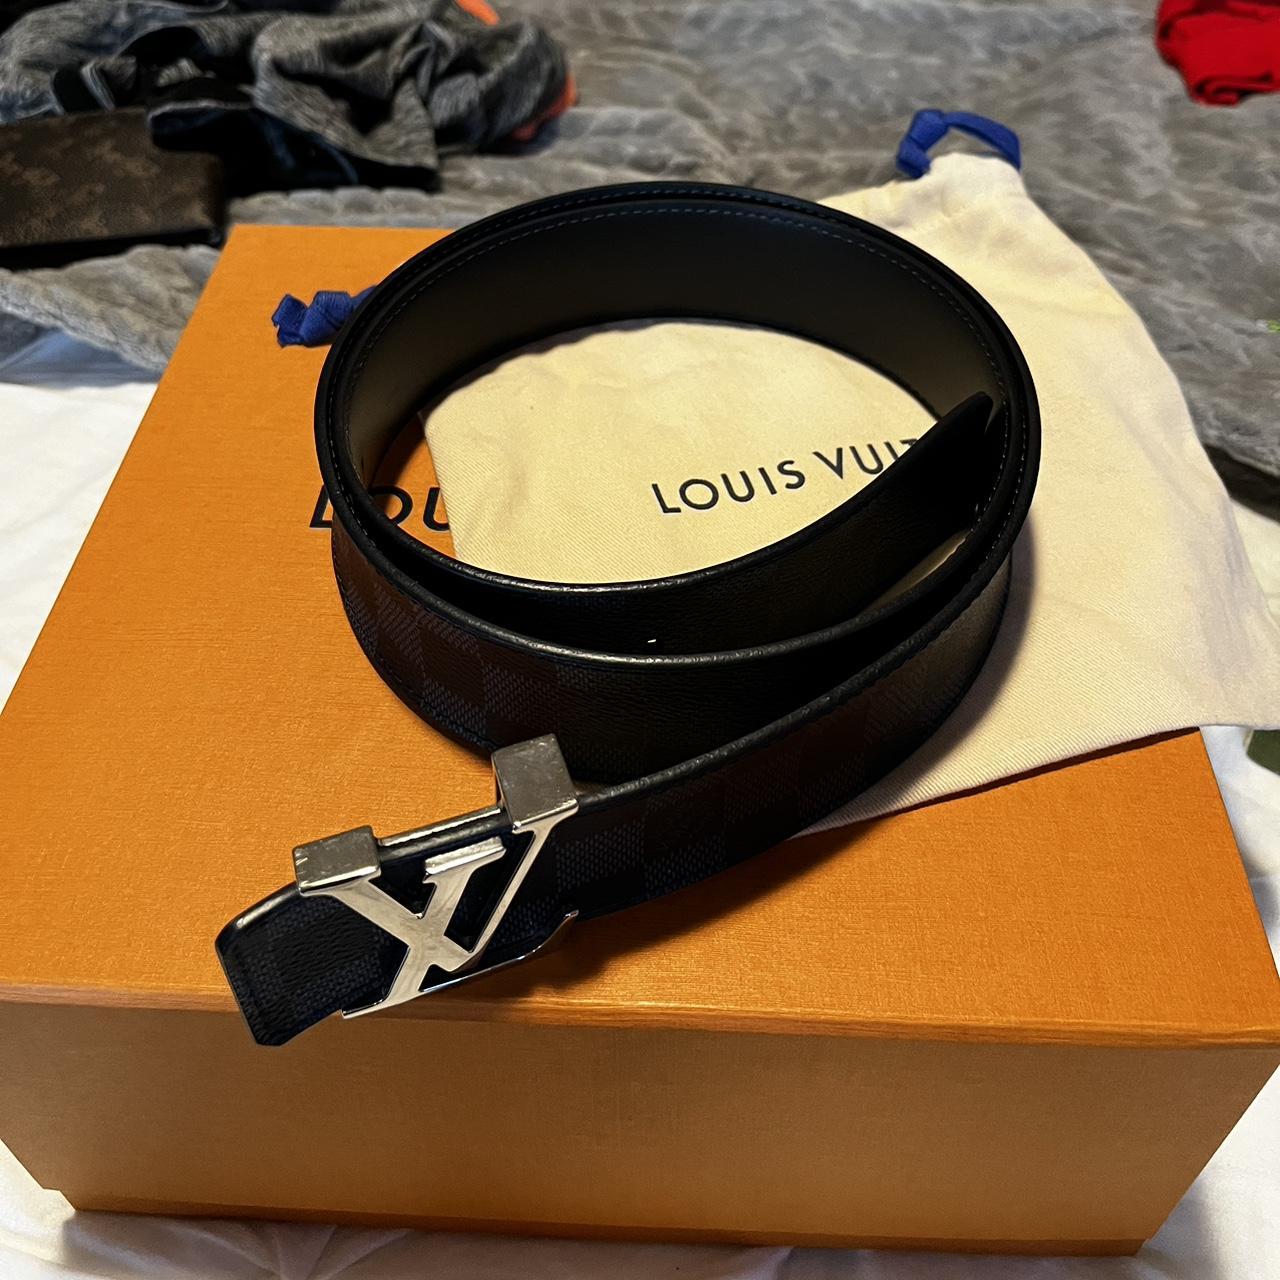 Brand new Louis Vuitton belt comes with box bag and - Depop